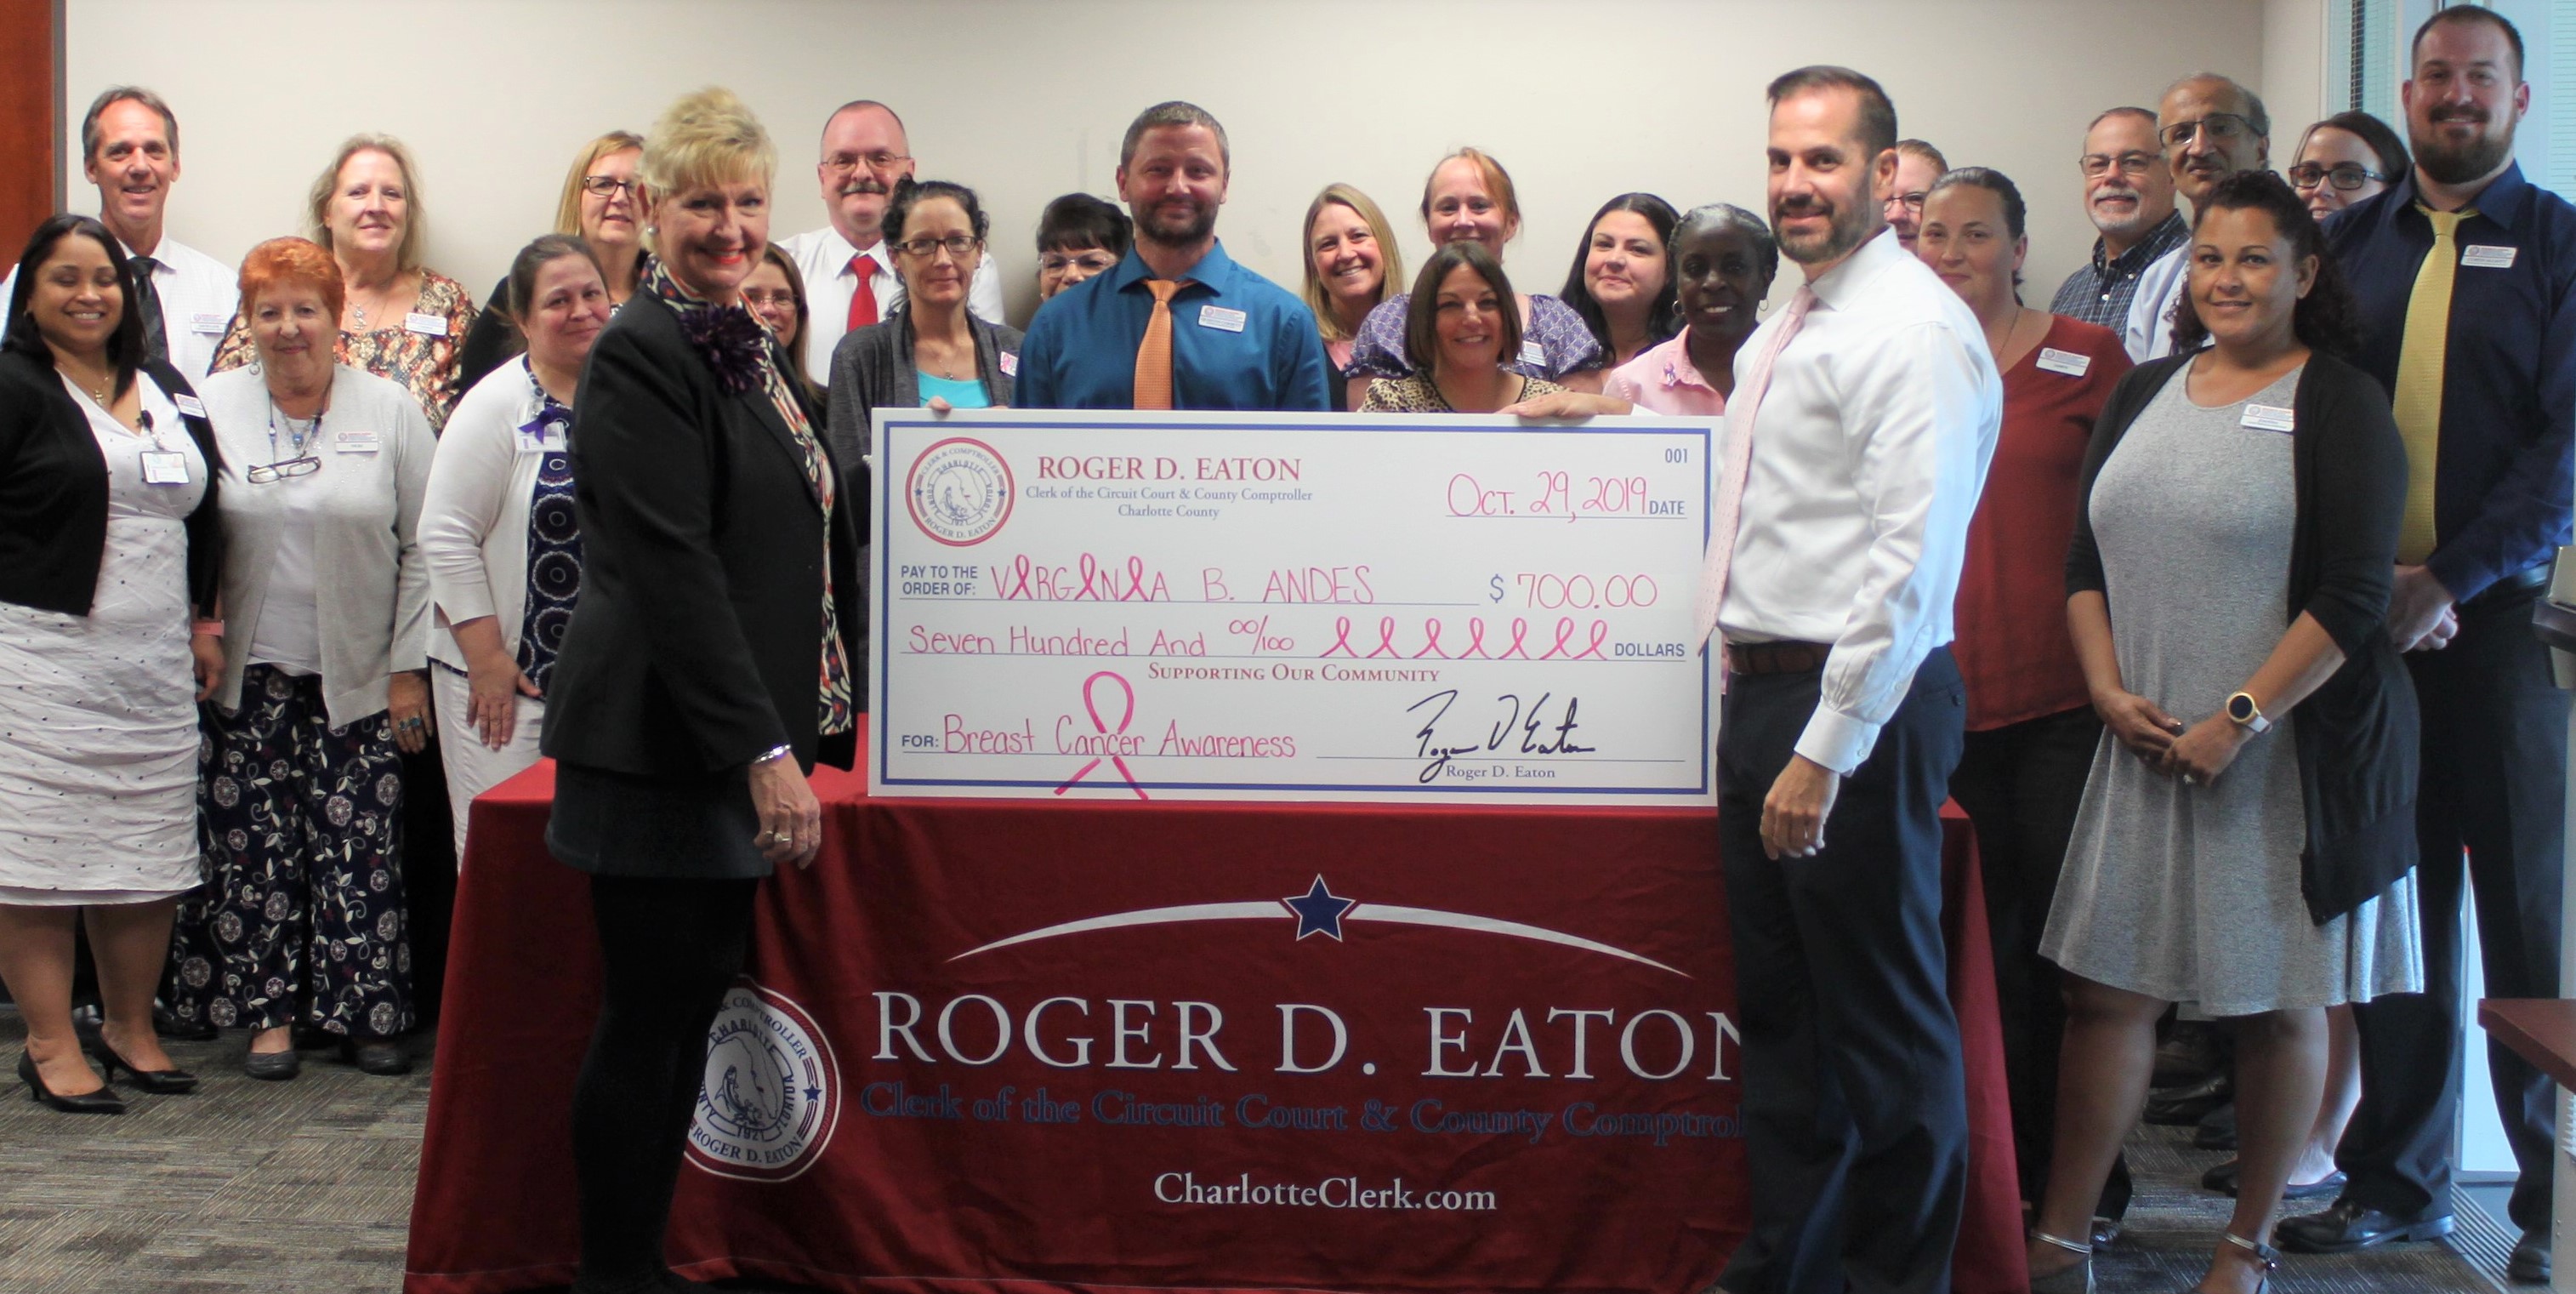 Roger D. Eaton, Clerk of the Circuit Court and County Comptroller and staff presents check to the Virginia B. Andes Volunteer Mammogram Program